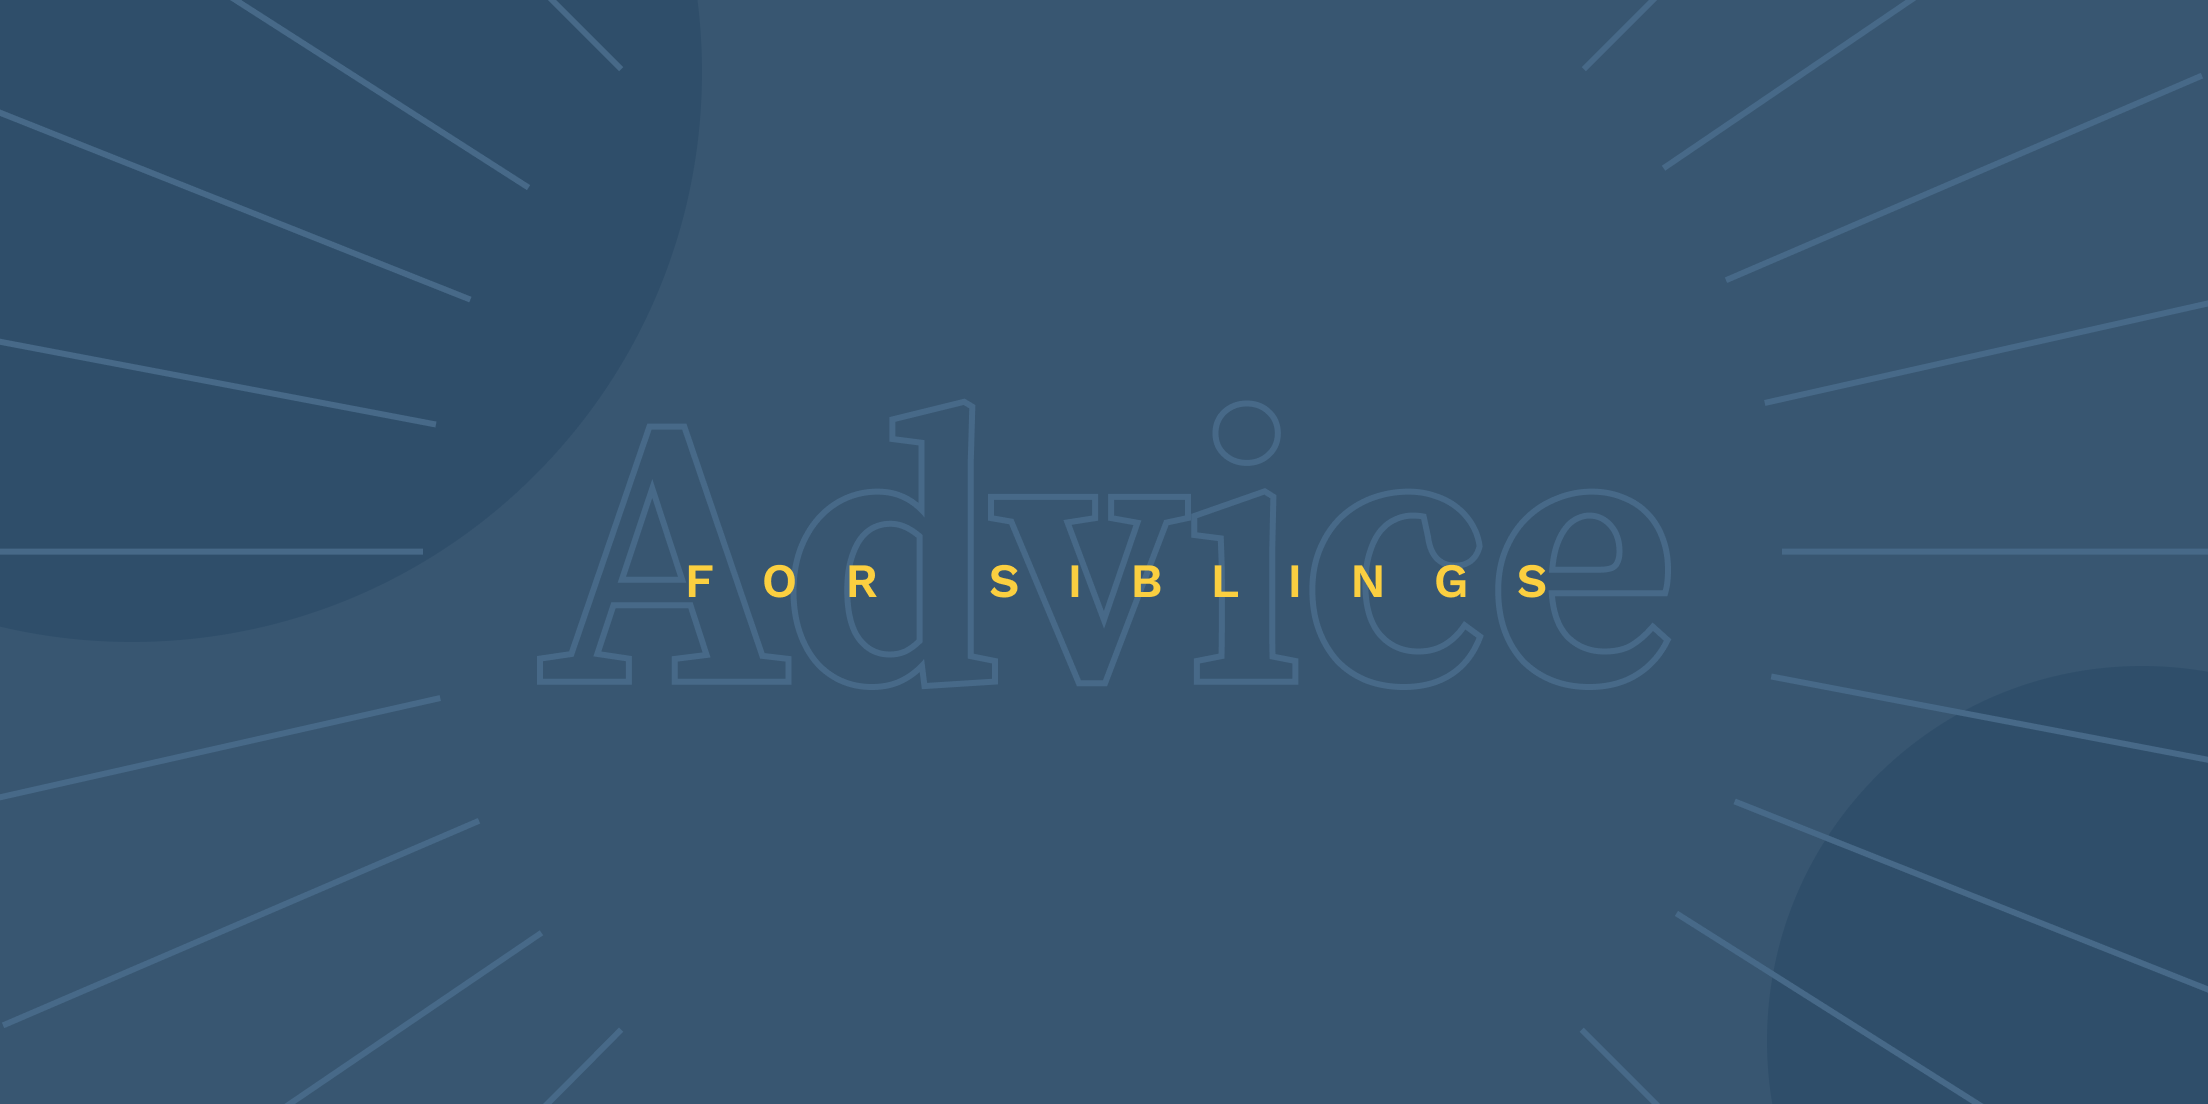 Advice for Siblings of Those With Autism